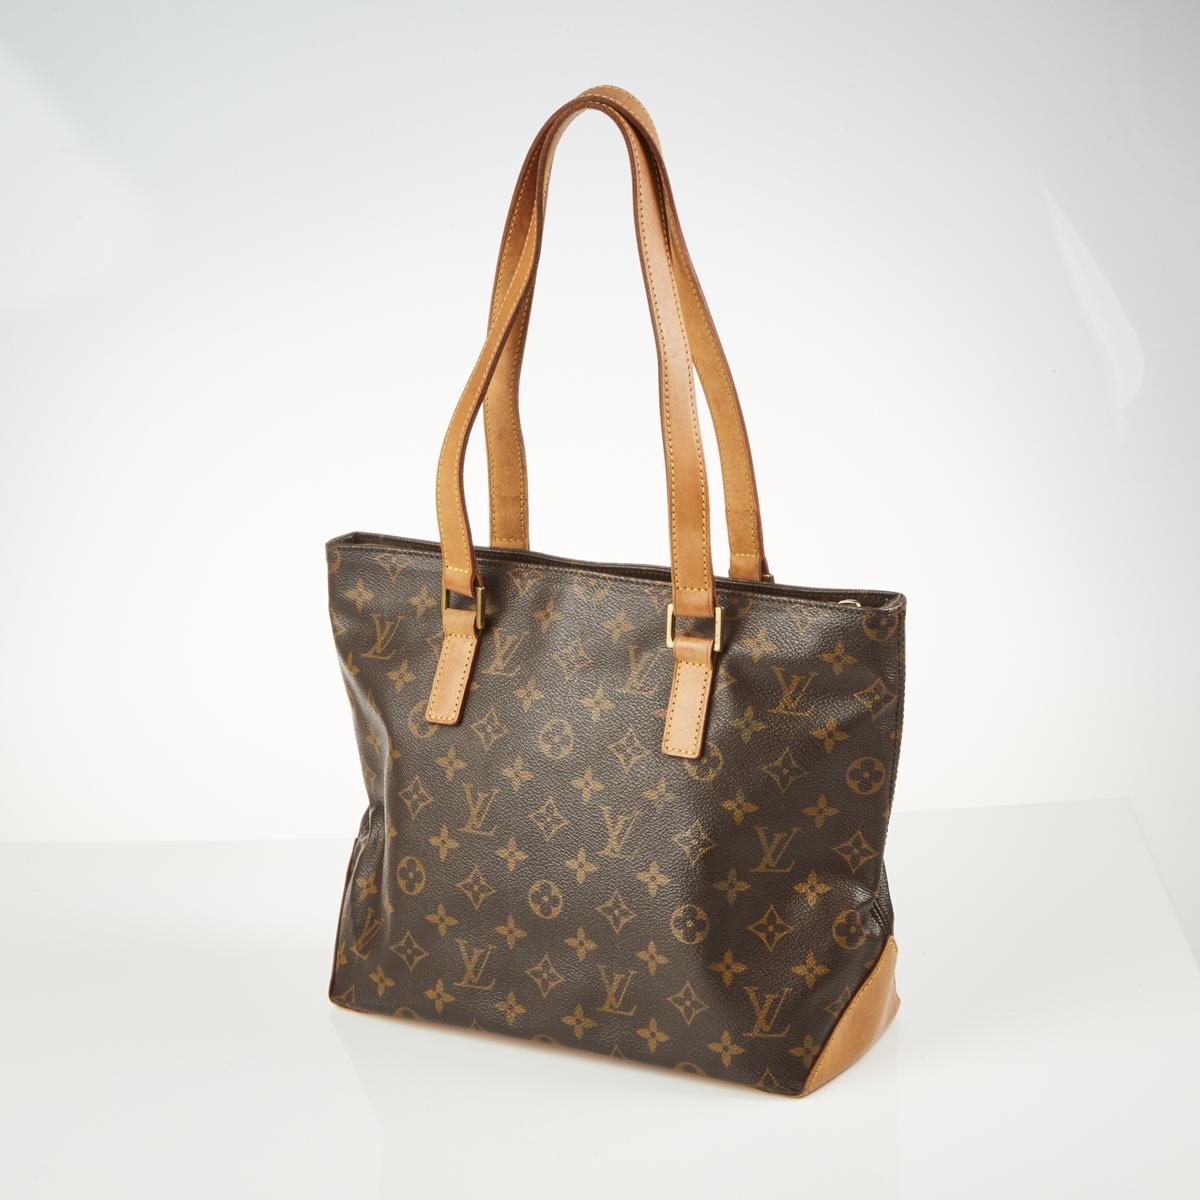 Sold at Auction: Louis Vuitton Cabas Piano Shoulder Bag, in brown